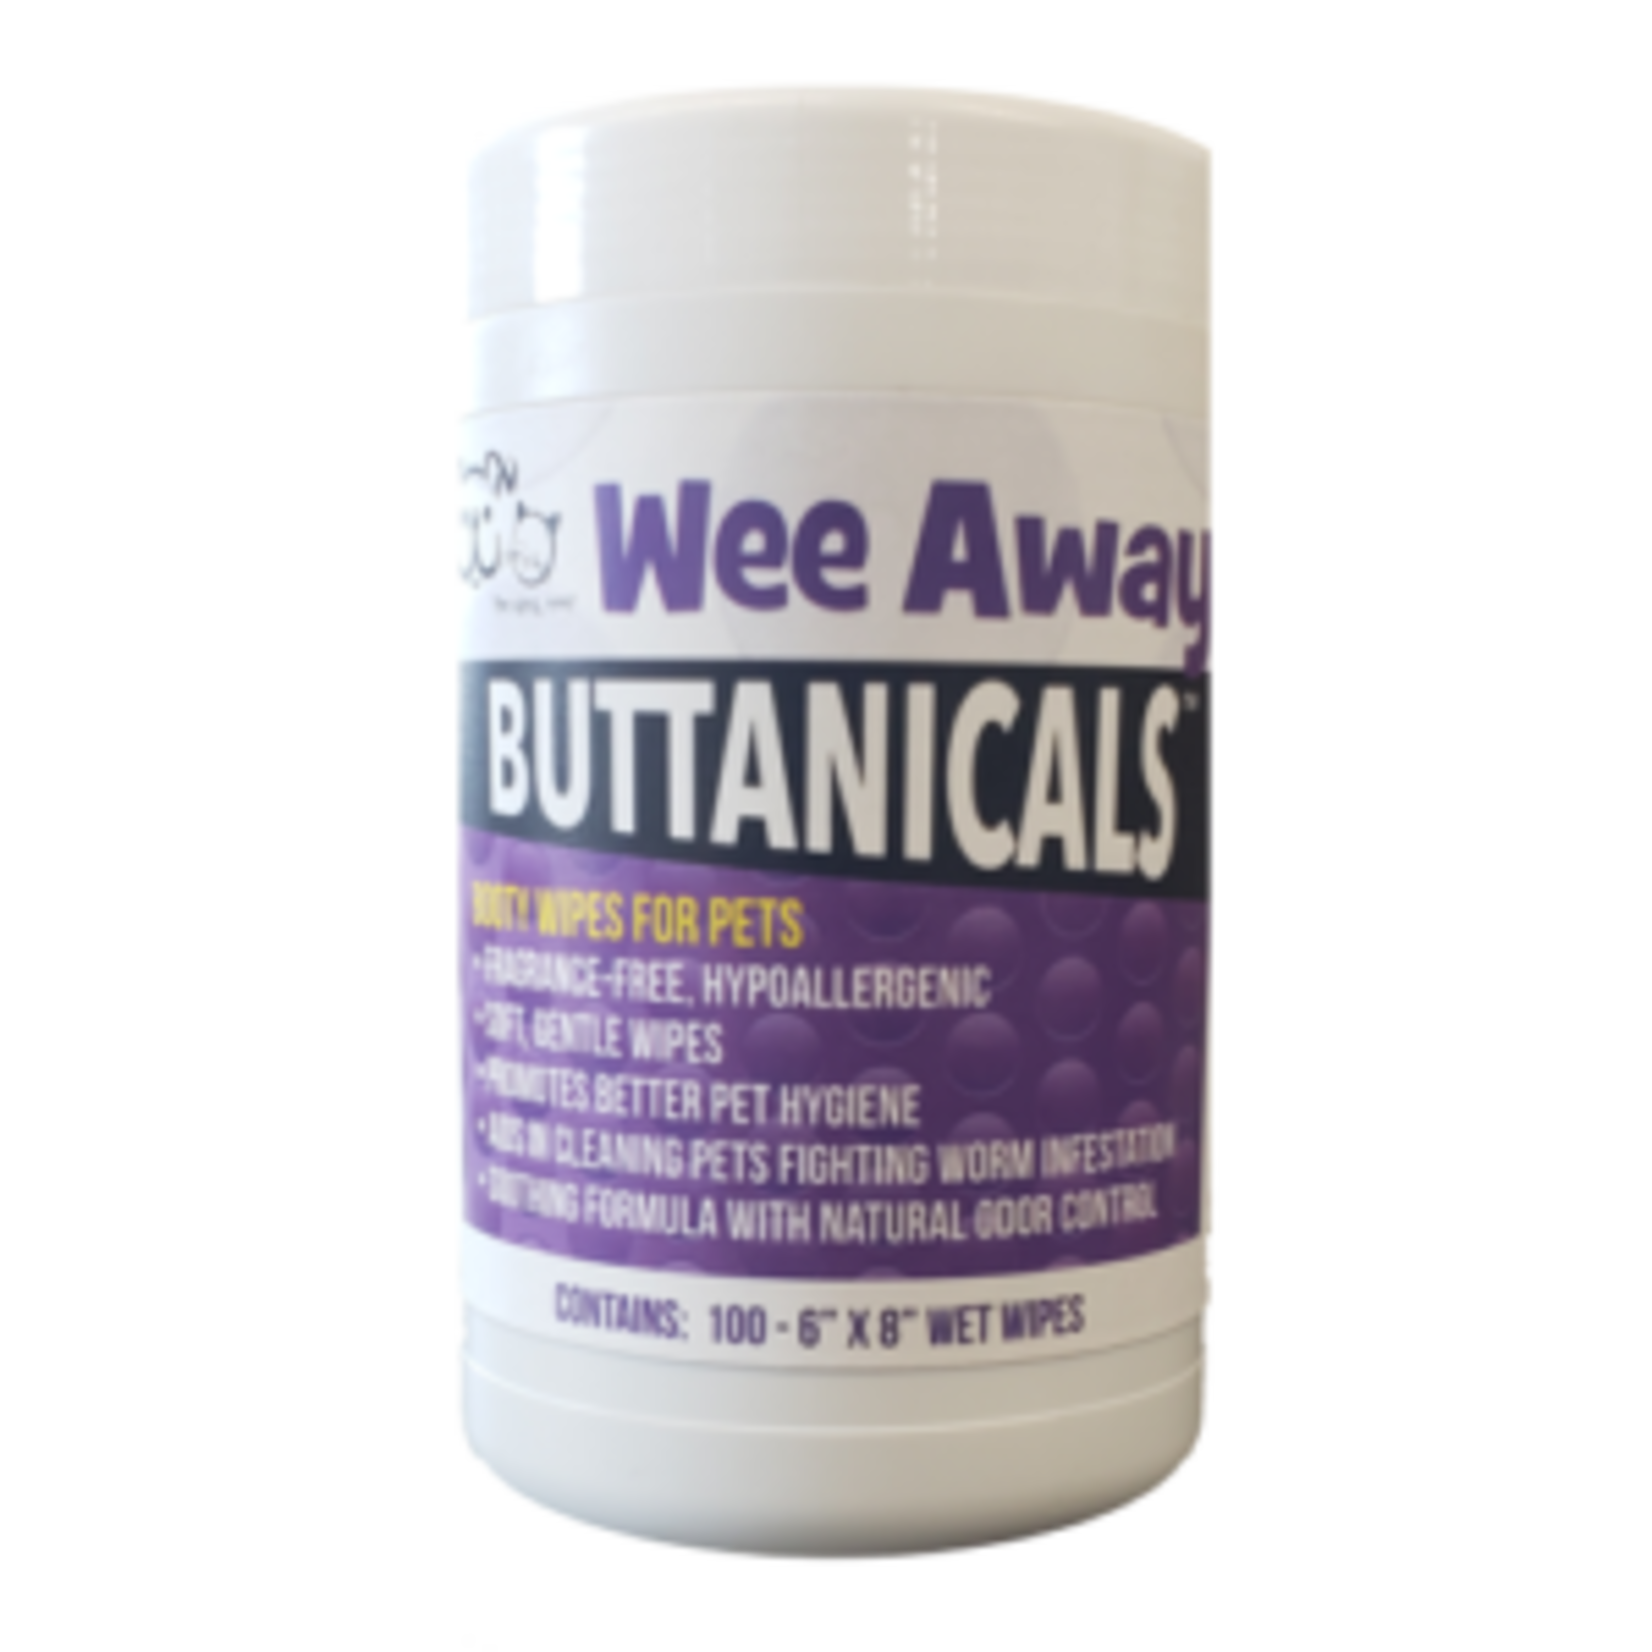 Wee Away Wipes Buttanicals 100ct